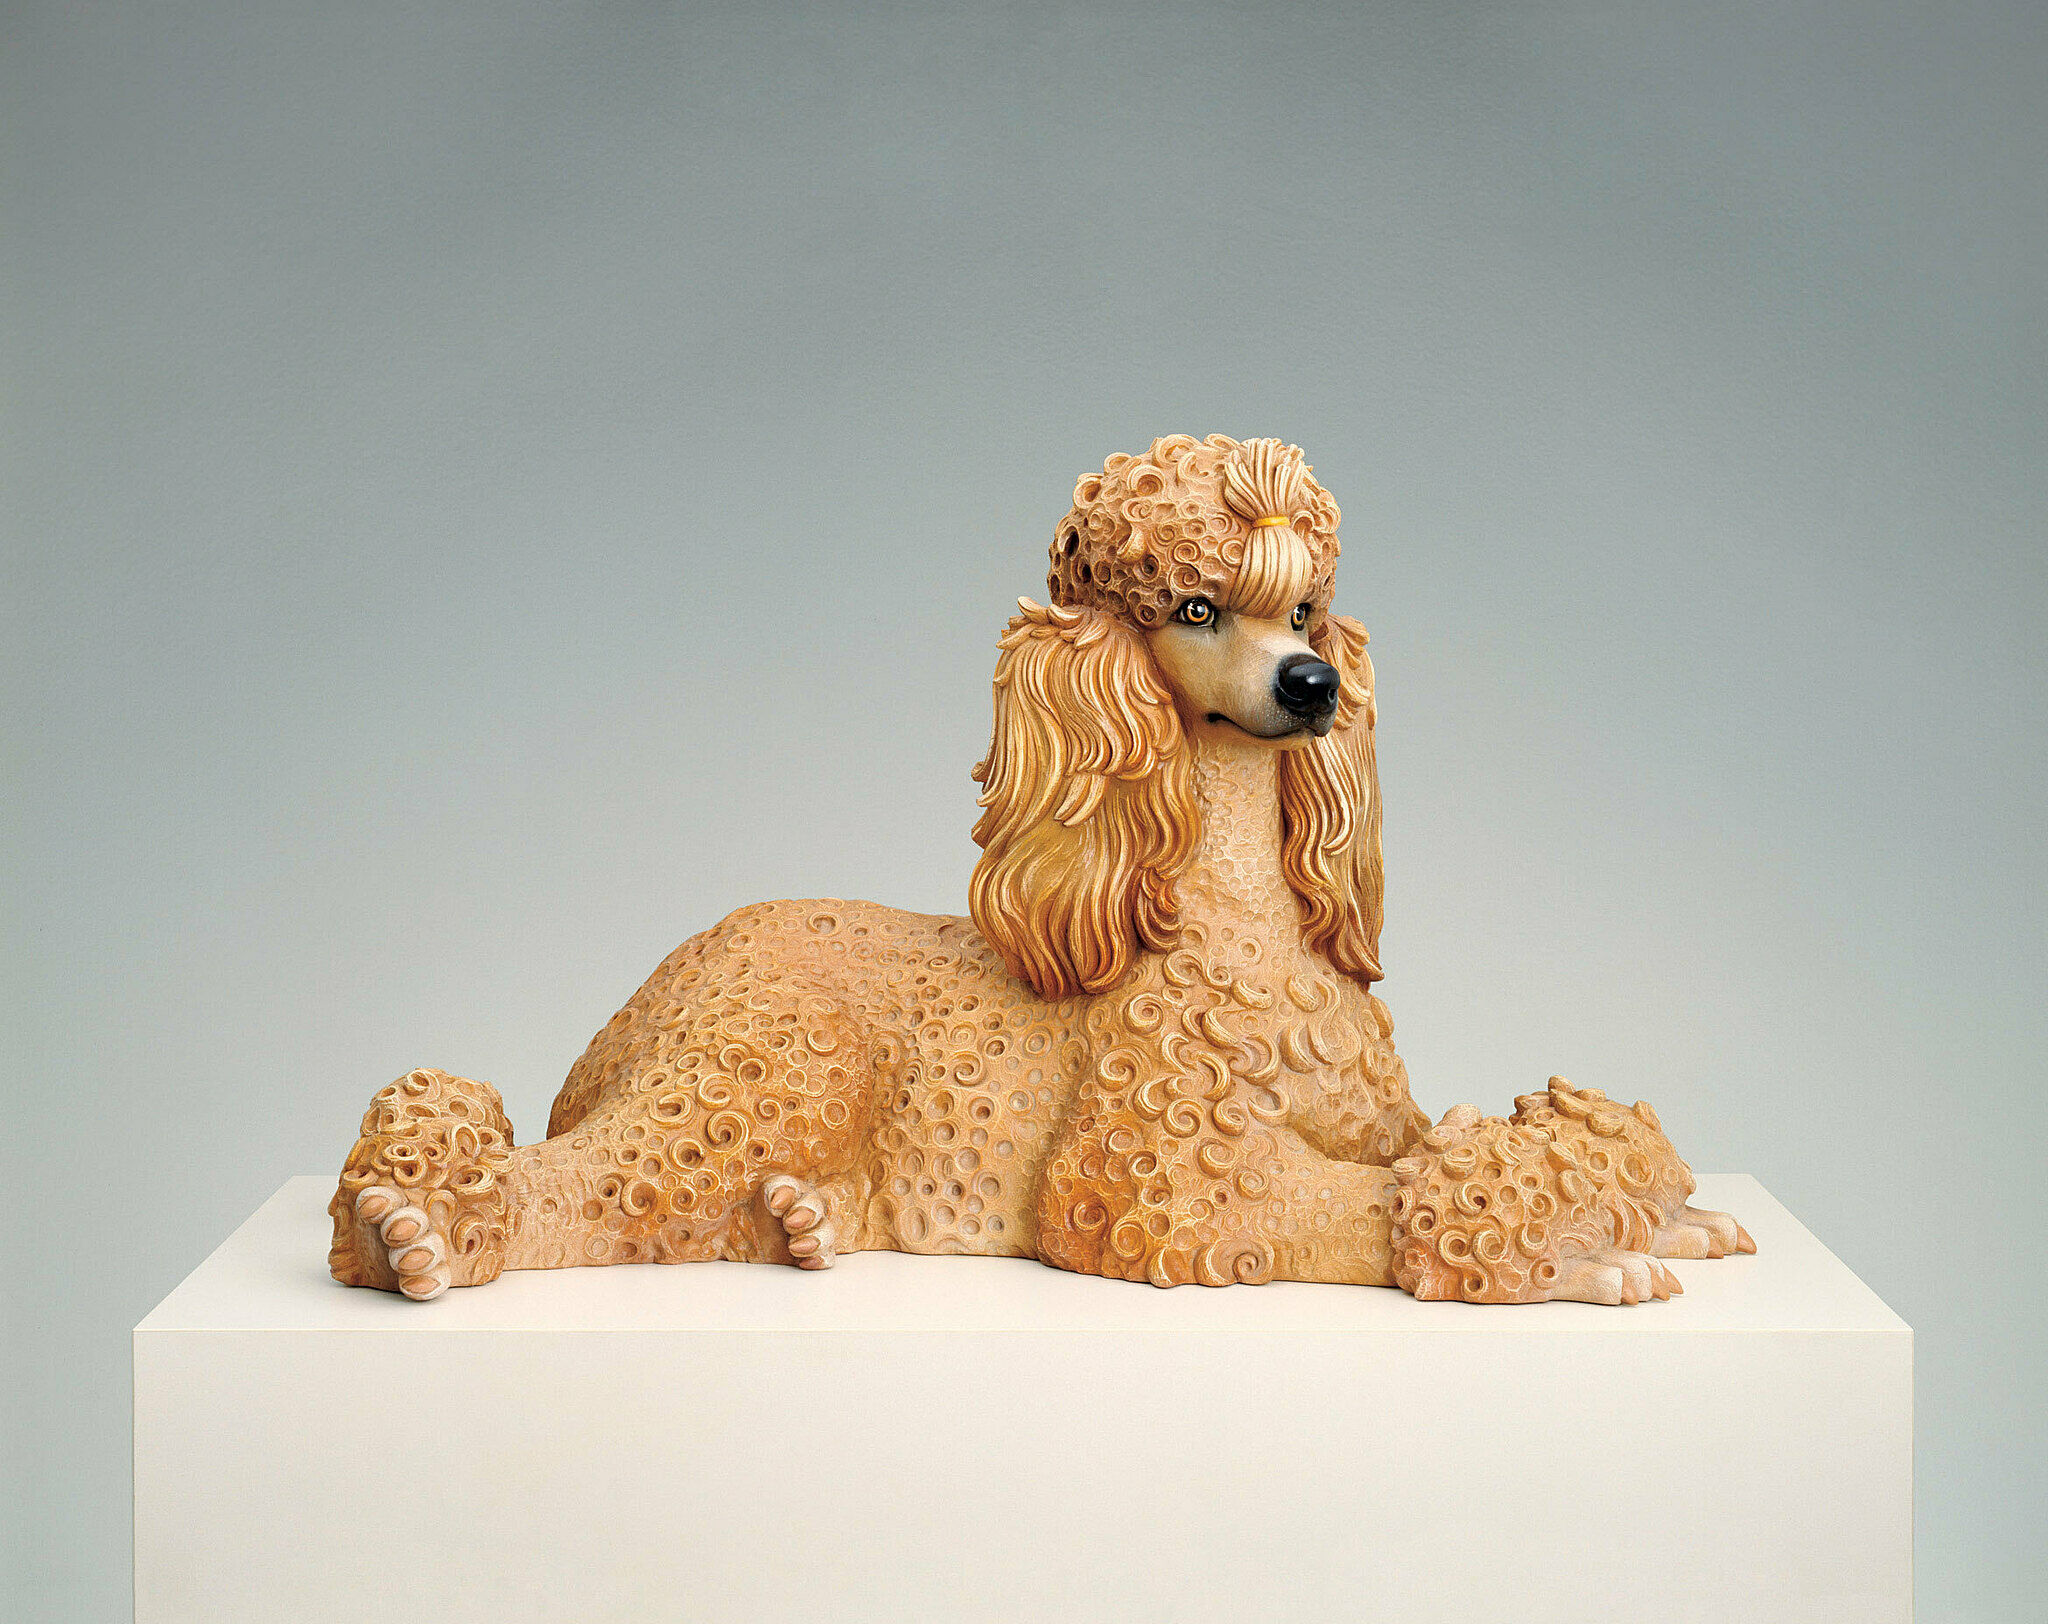 A realistic sculpture of a poodle with curly fur, lying on a white pedestal against a plain gray background.